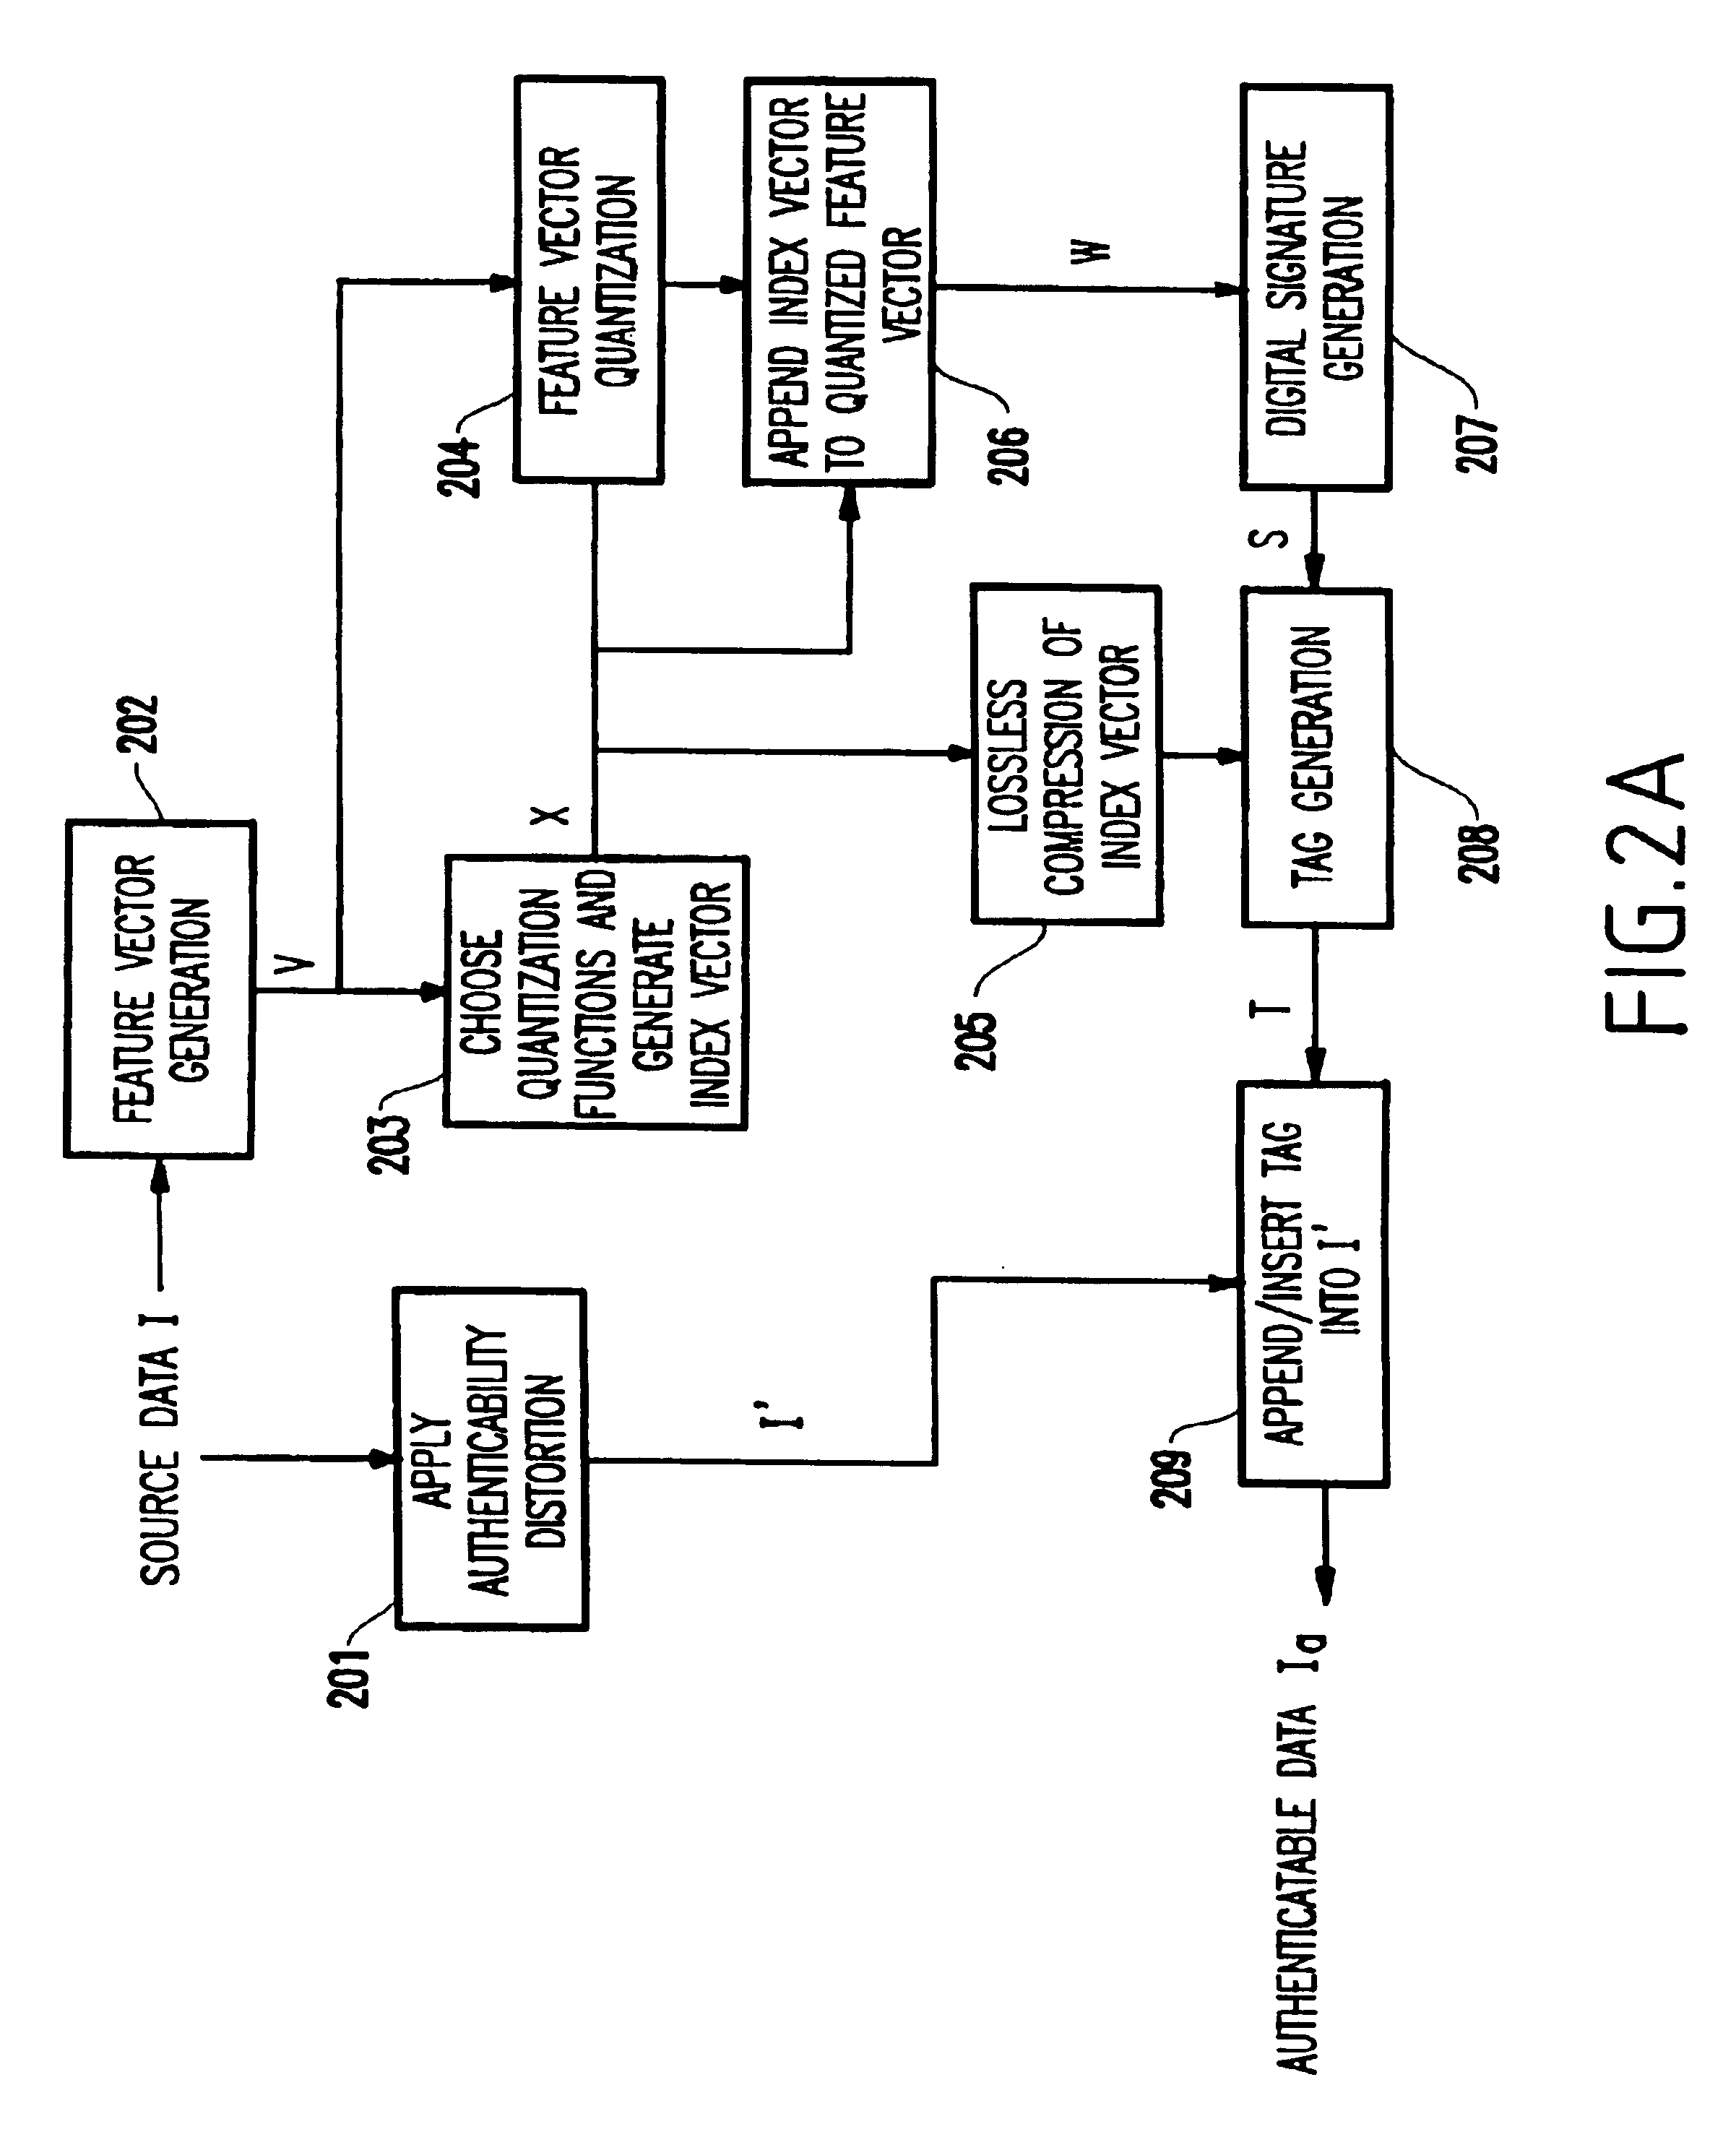 Cryptography-based low distortion robust data authentication system and method therefor